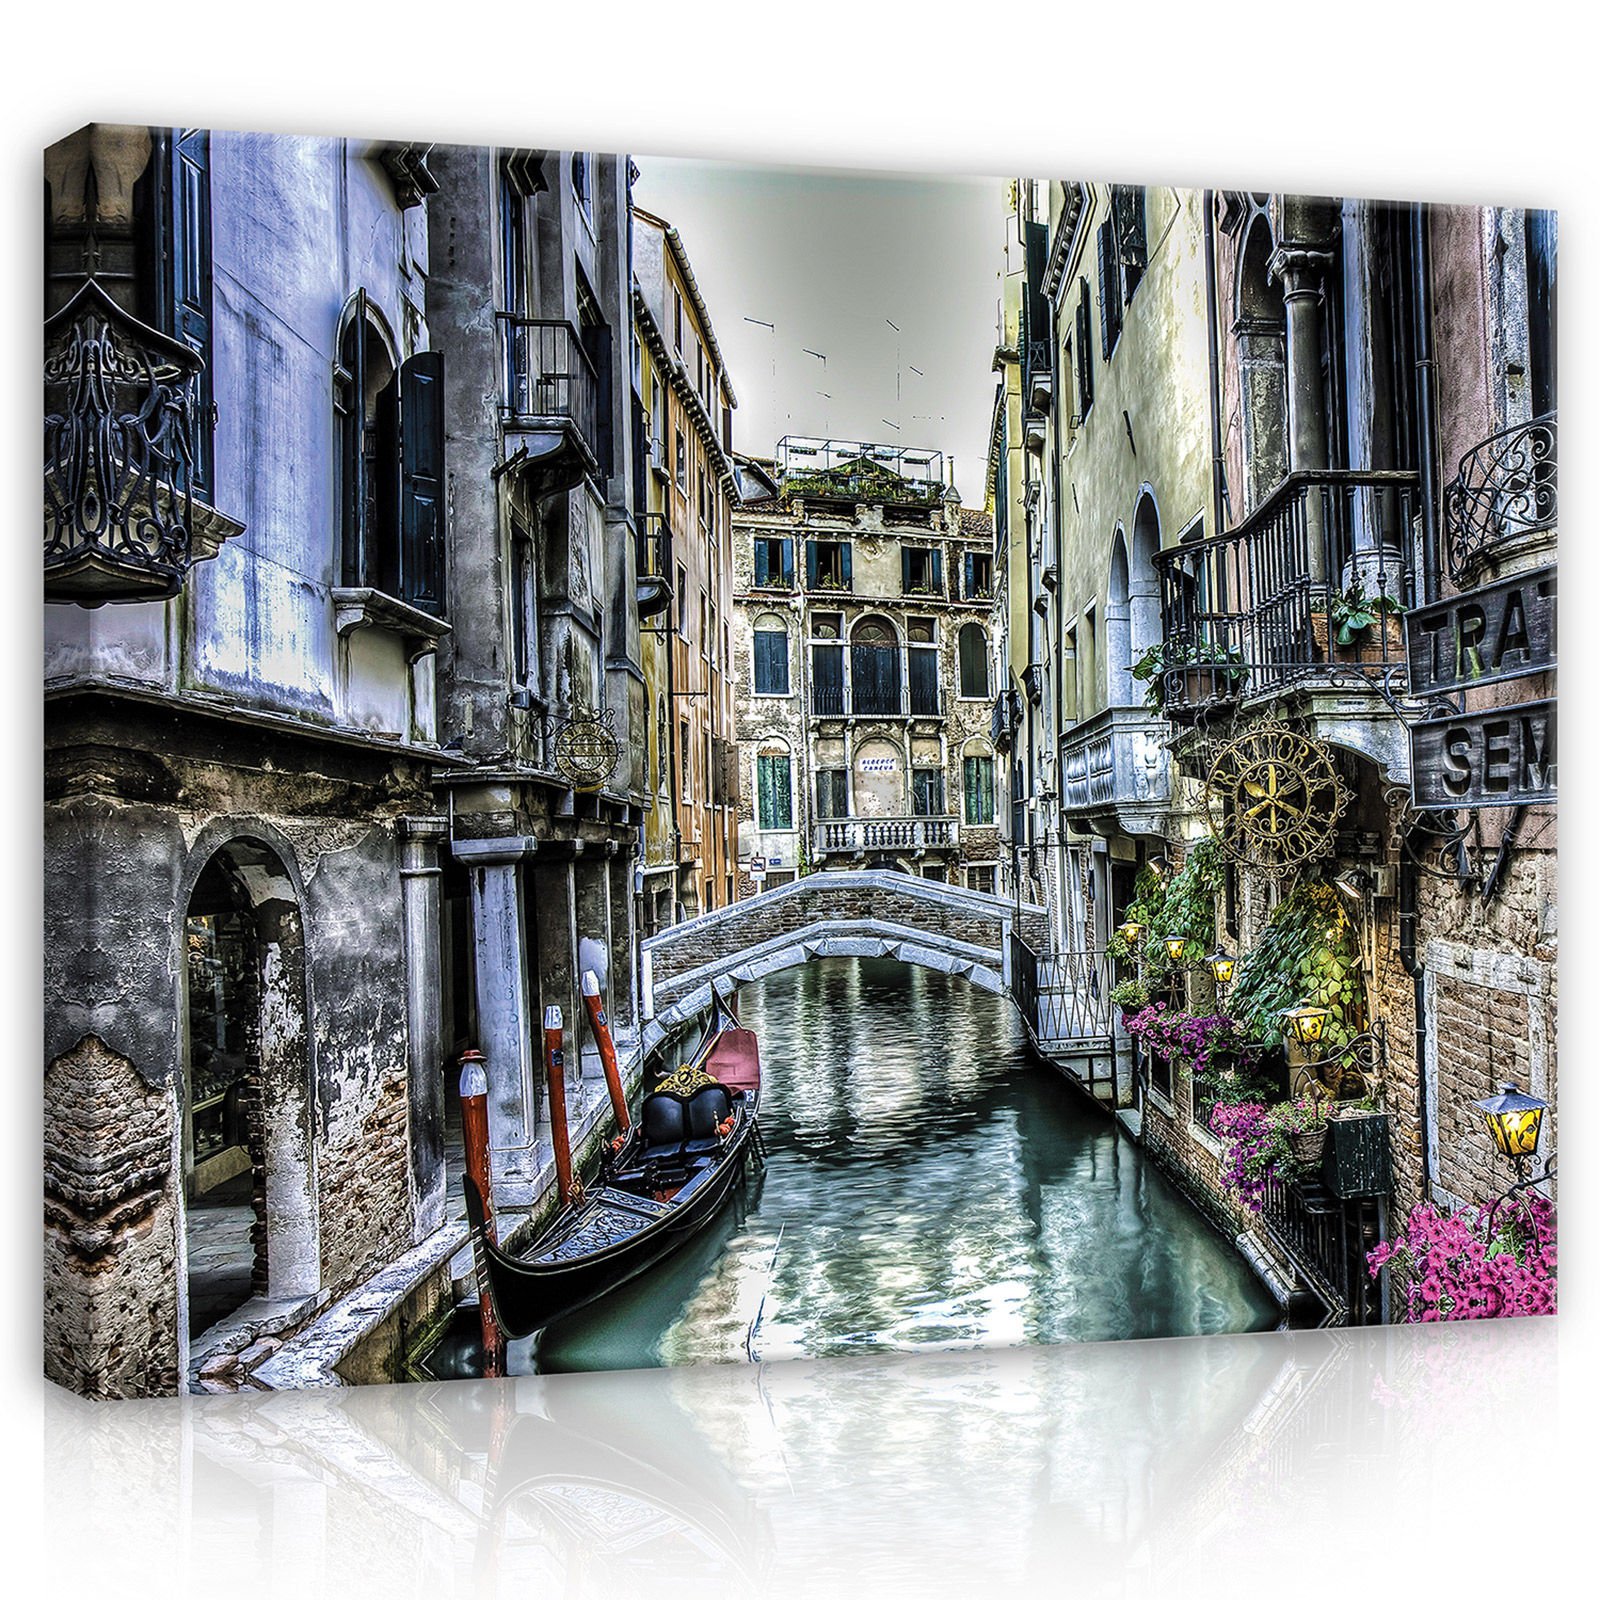 Painting on canvas: Venice (channel) - 80x60 cm